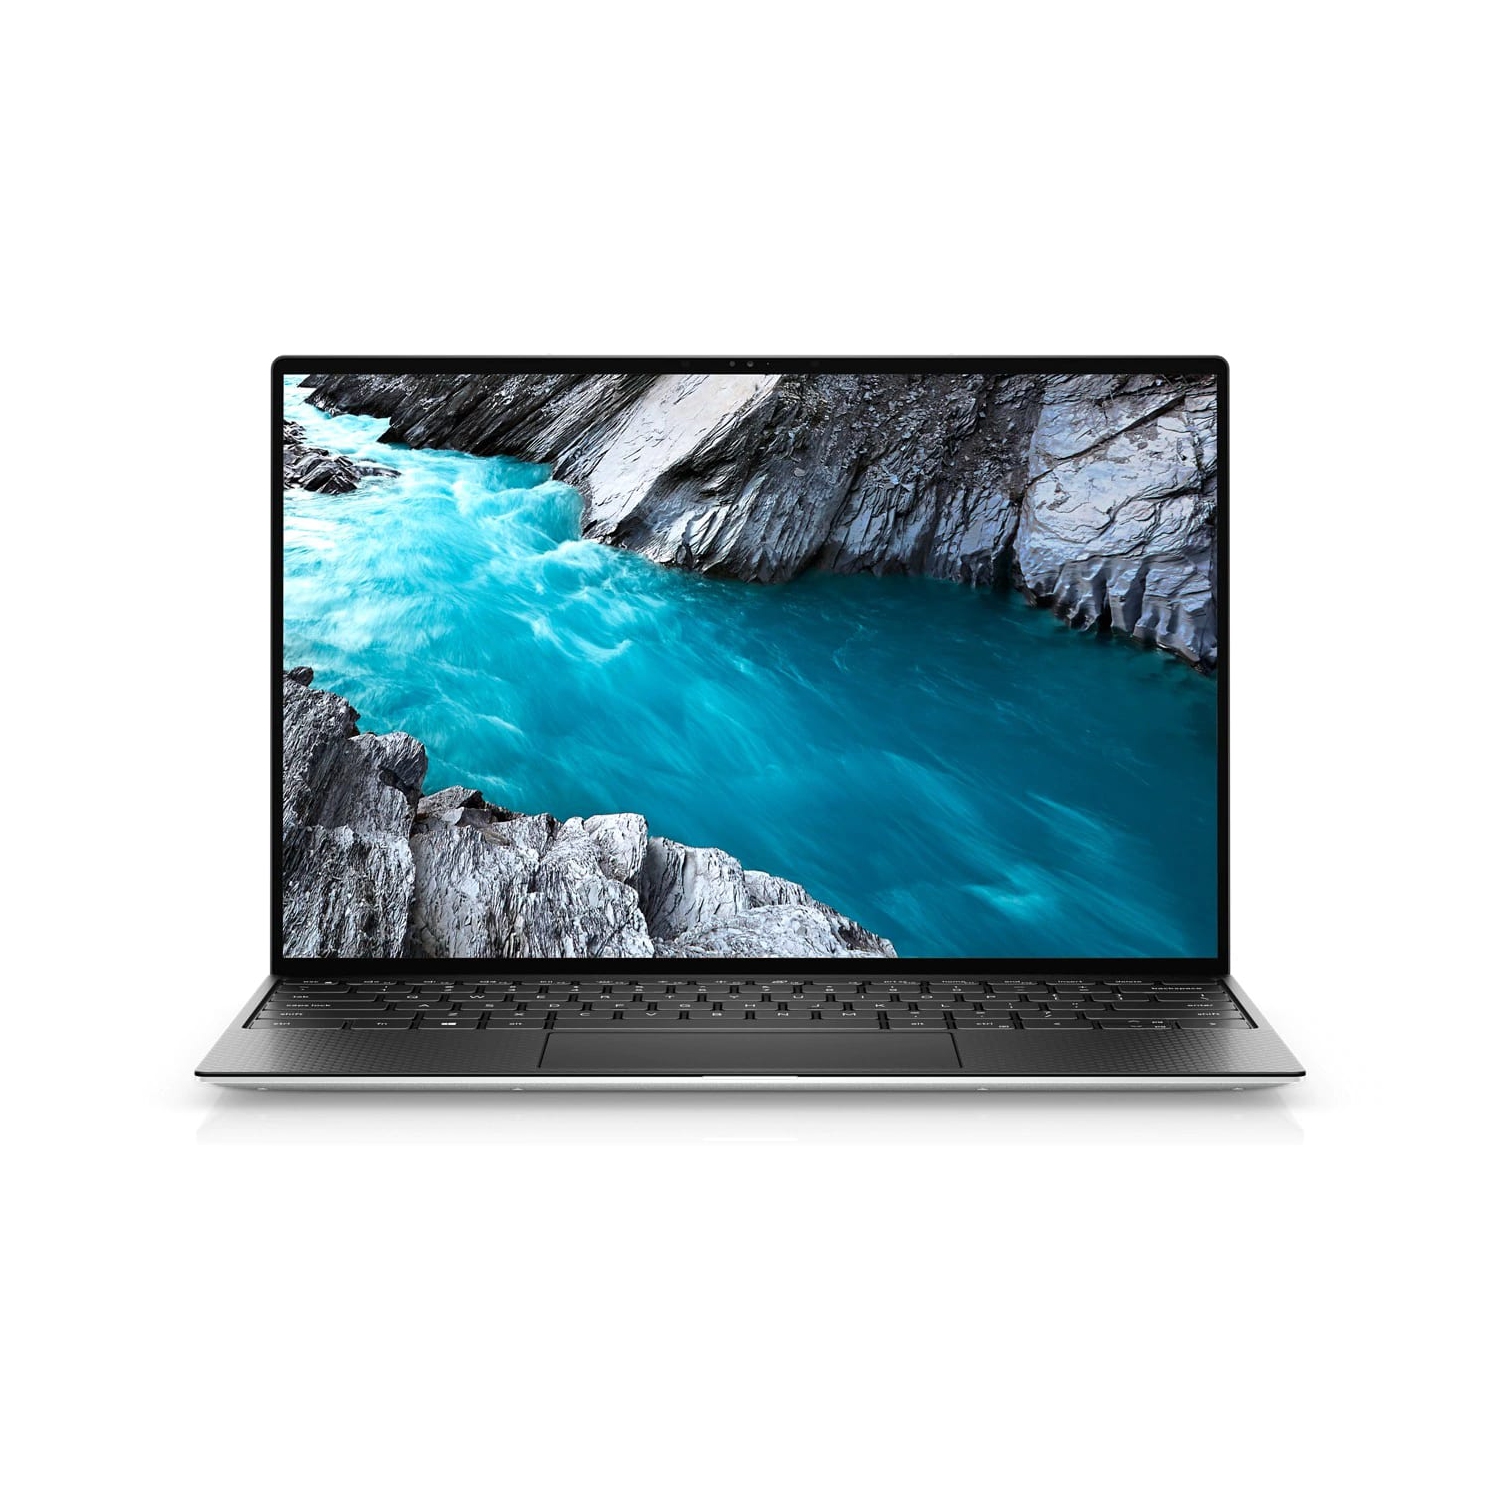 Dell XPS 13 9310 Laptop (2020) | 13.4" 4K Touch | Core i7 - 256GB SSD - 16GB RAM | 4 Cores @ 4.4 GHz - 11th Gen CPU Certified Refurbished